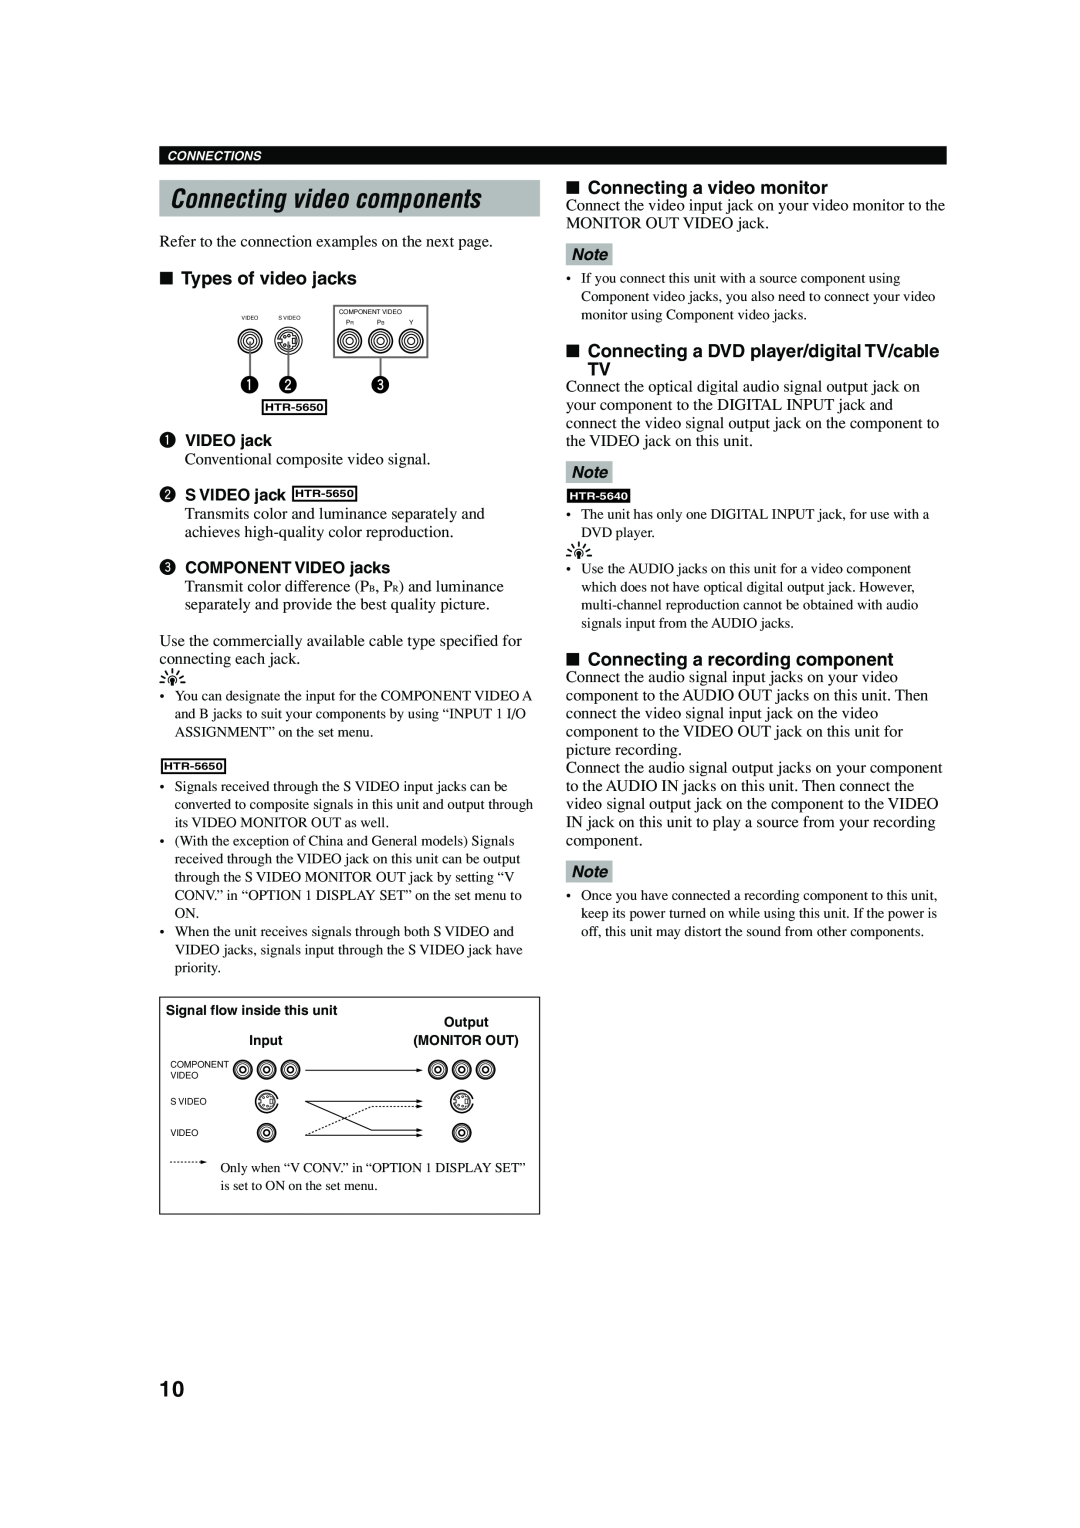 Yamaha HTR-5640 owner manual Connecting video components, Types of video jacks, Connecting a video monitor 